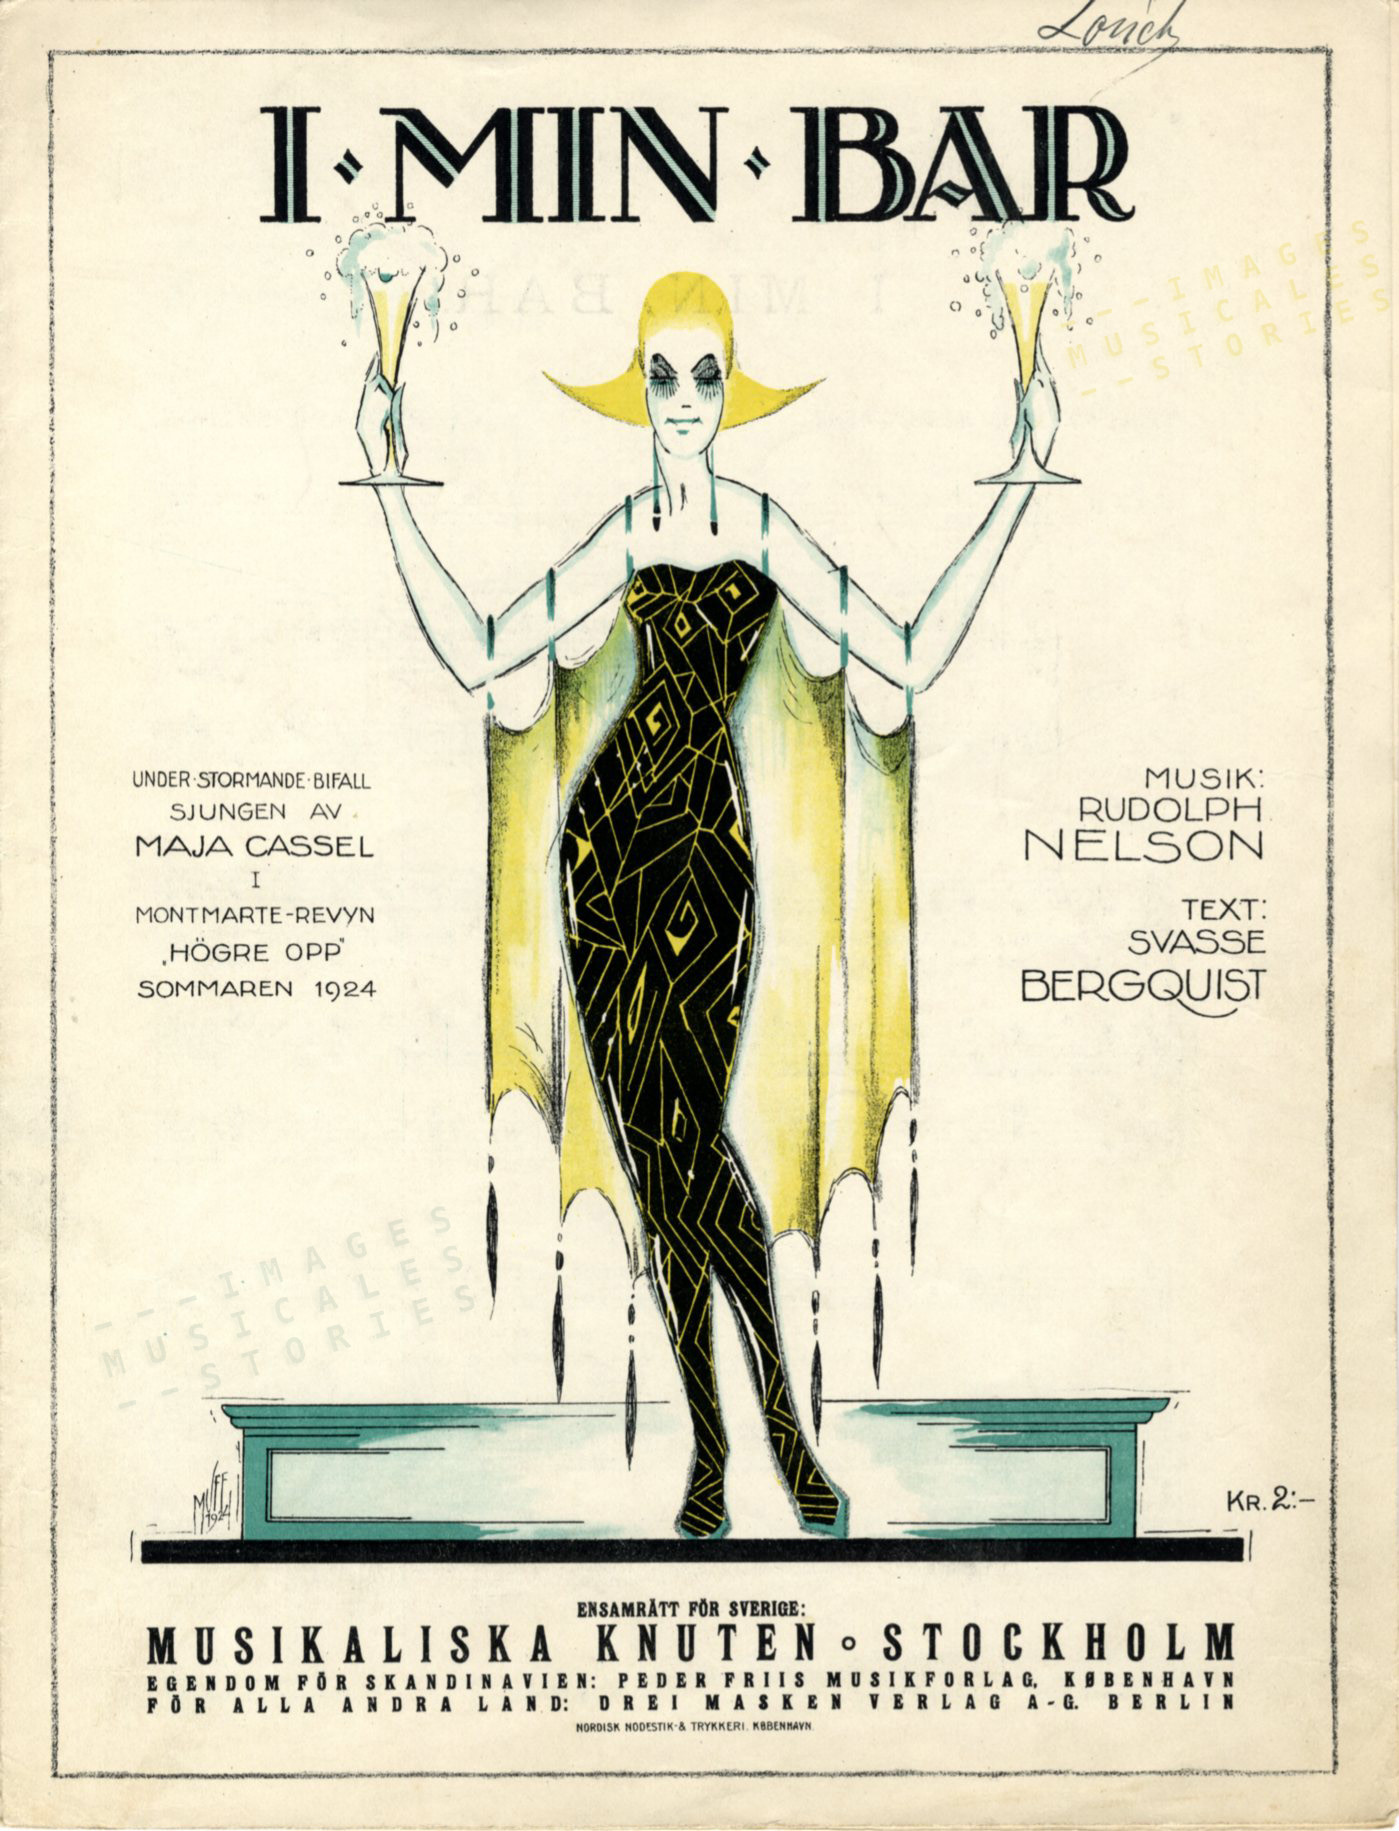 'I min bar', music by Rudolph Nelson (1924 - click image to enlarge